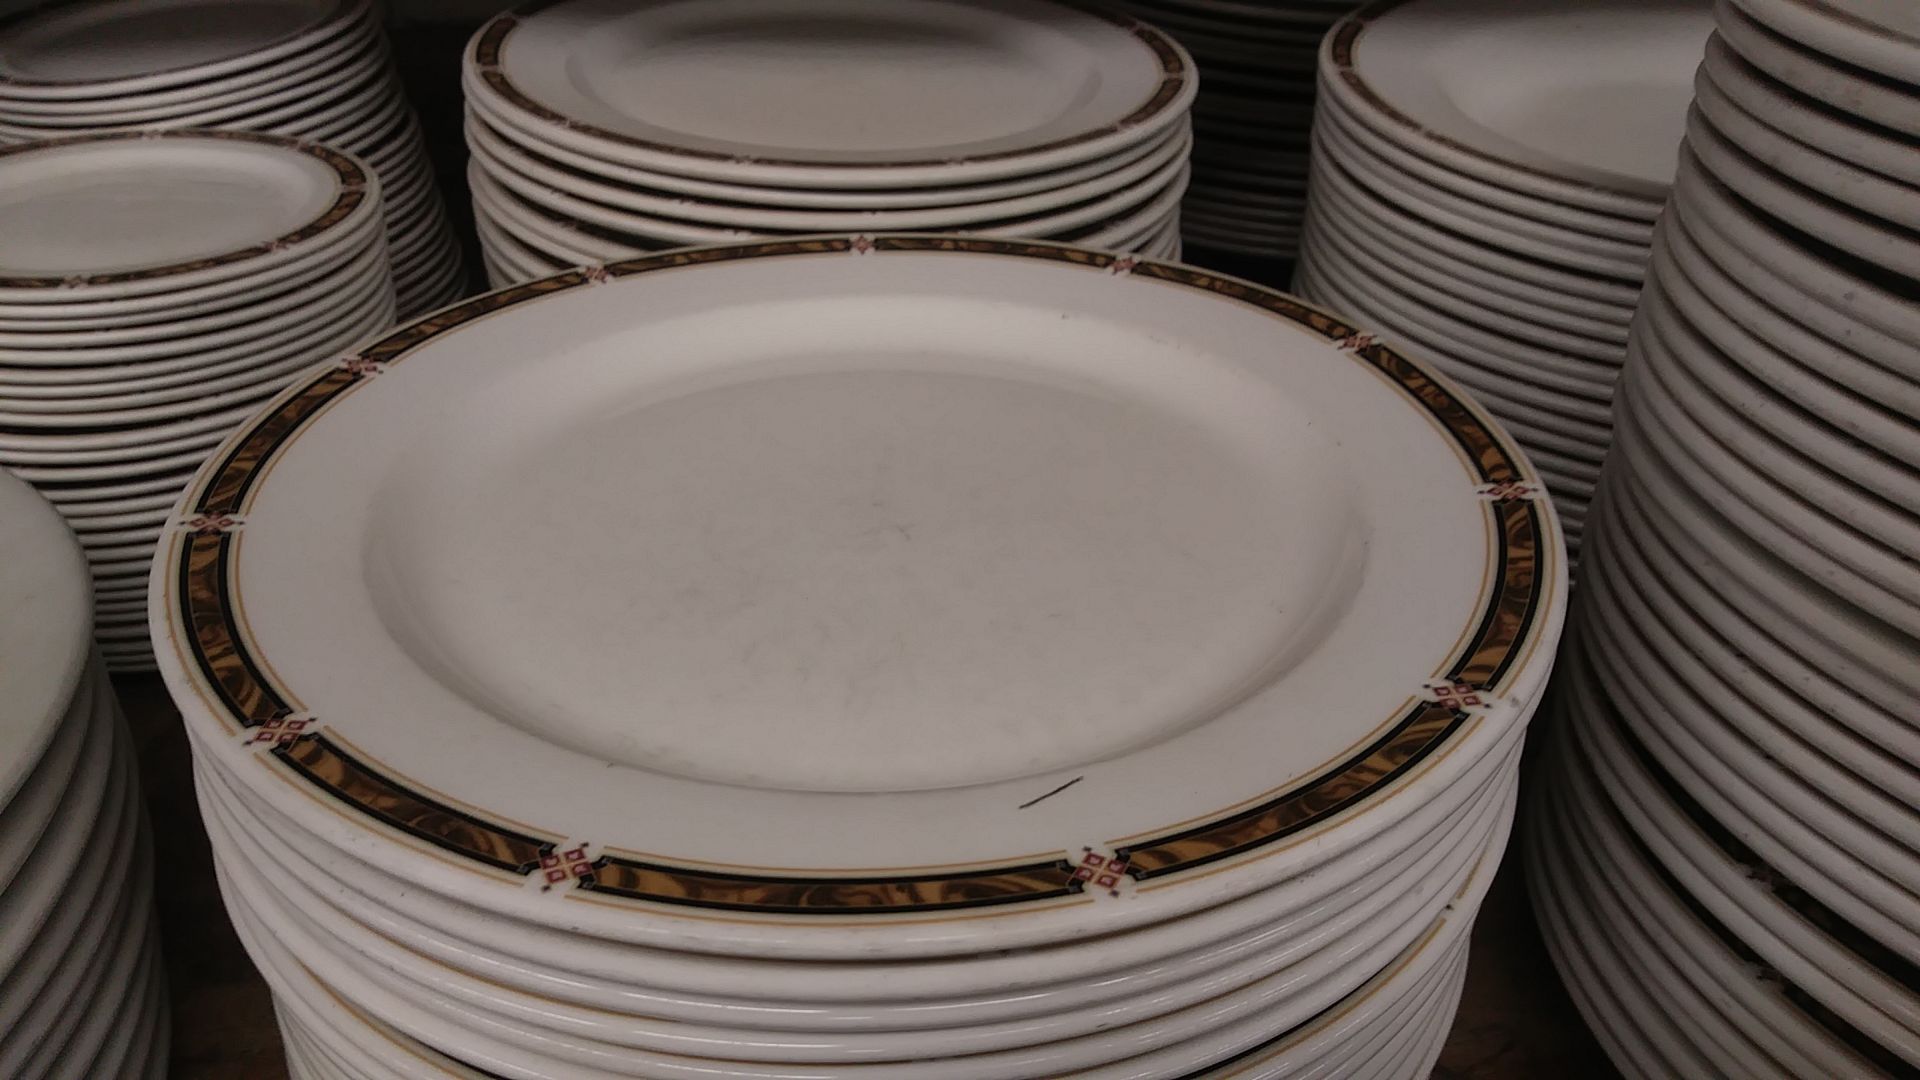 10" STEELITE PLATE (includes QTY 65 in this lot)